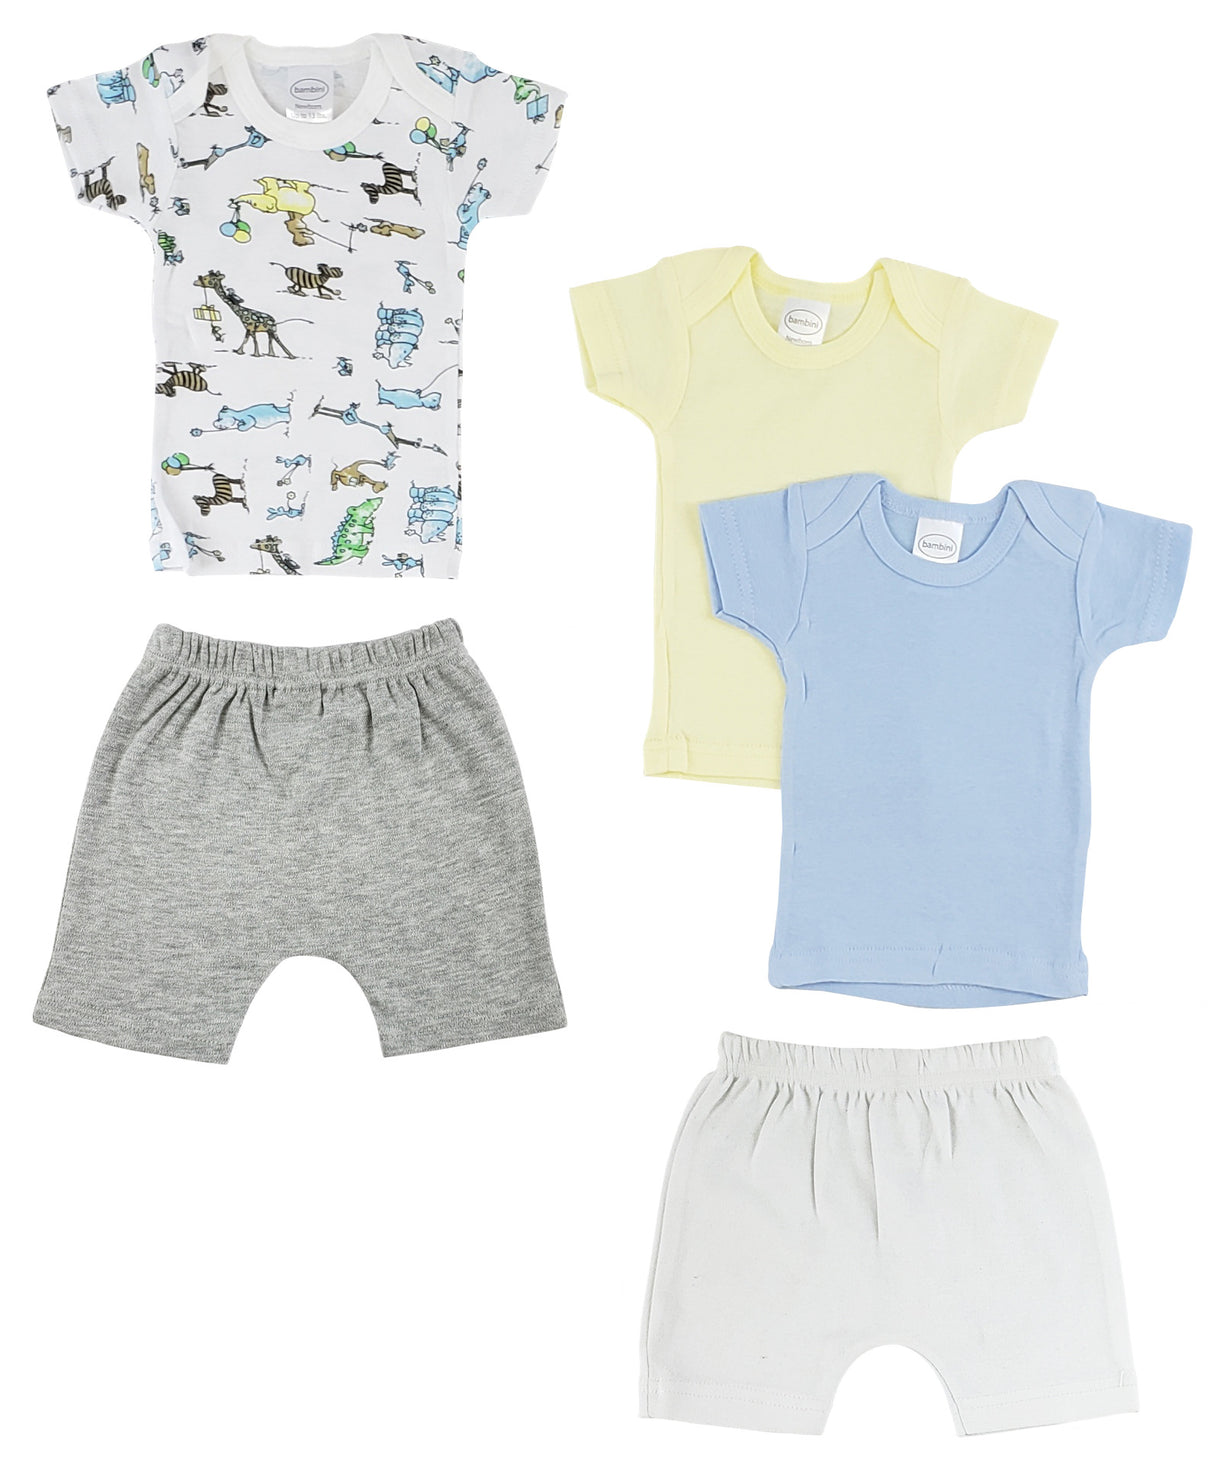 Infant Girls T-shirts And Shorts